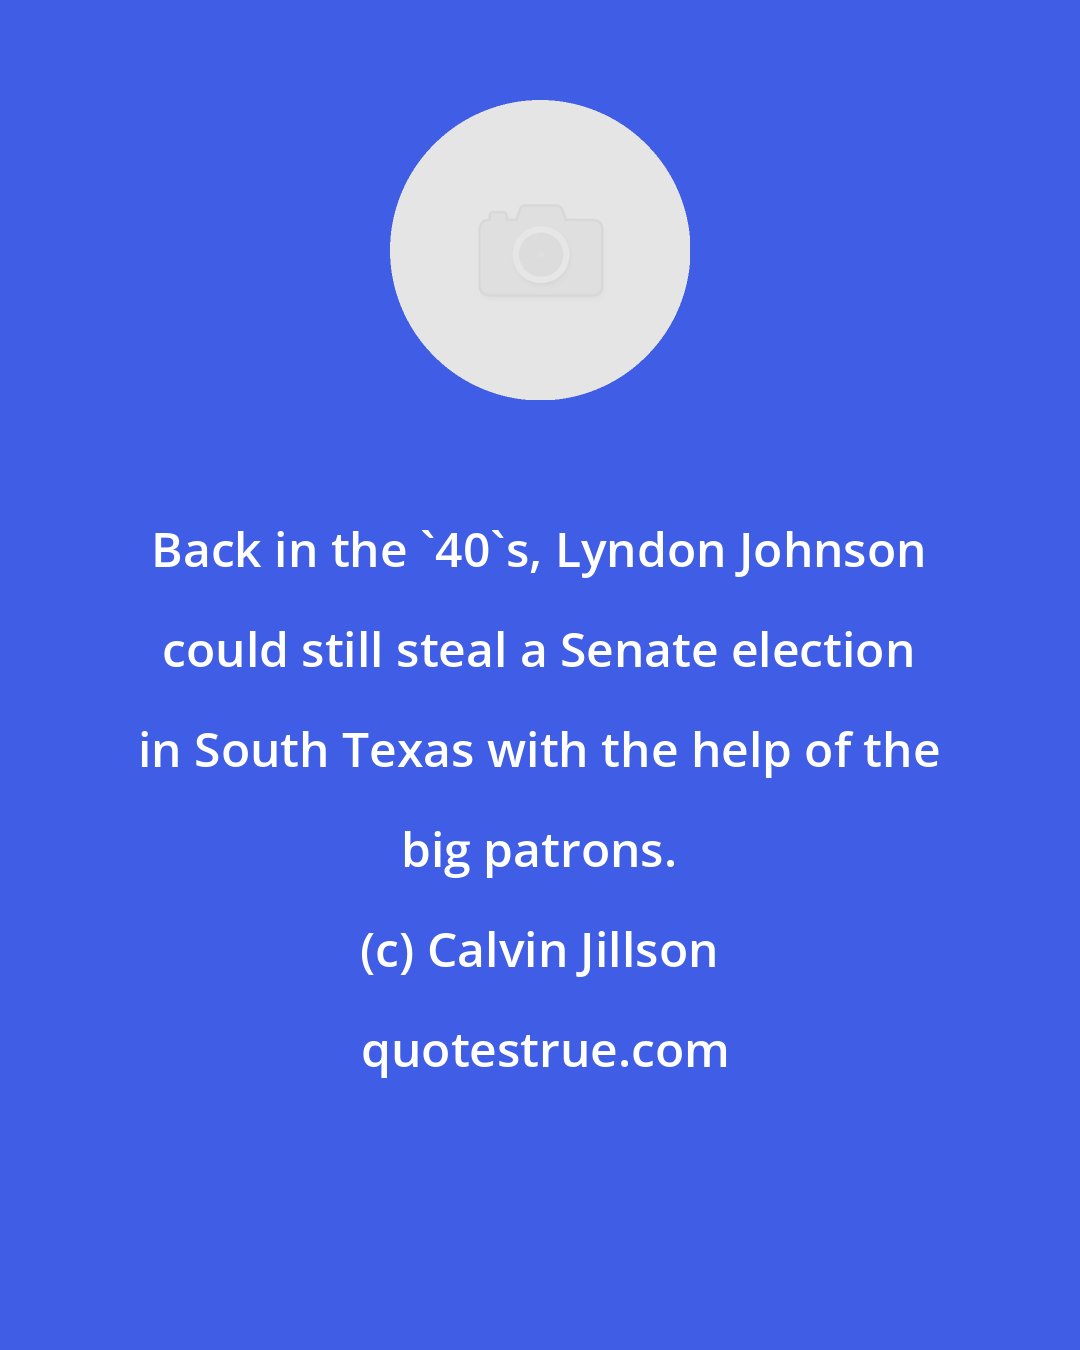 Calvin Jillson: Back in the '40's, Lyndon Johnson could still steal a Senate election in South Texas with the help of the big patrons.